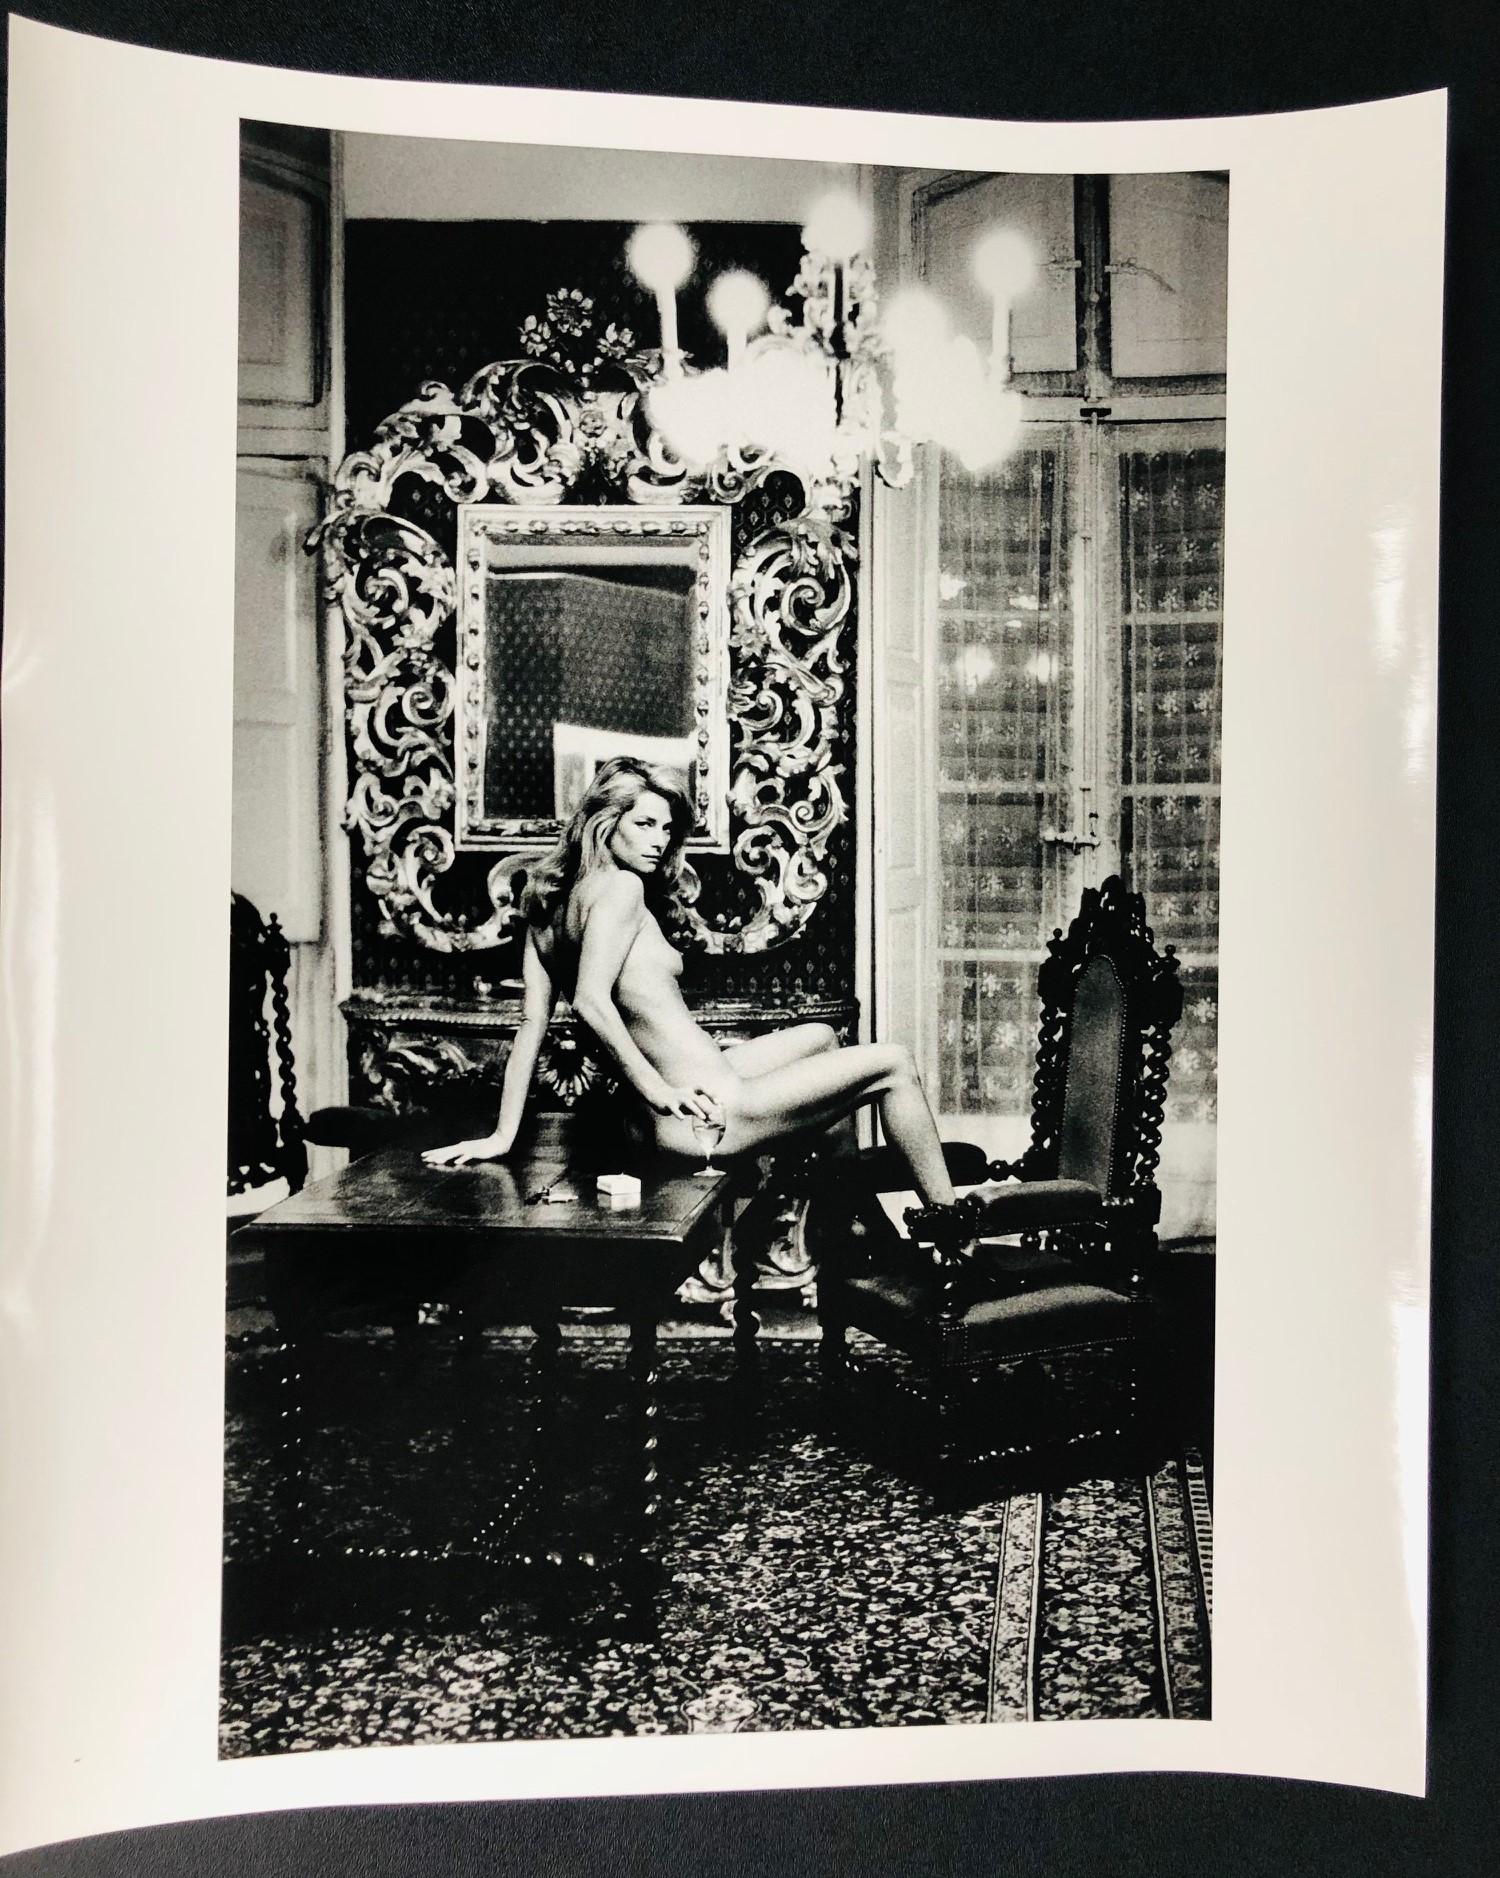 Charlotte Rampling at Hotel Nord, Paris Pinus, Arles, France, 1973 signed - Photograph by Helmut Newton